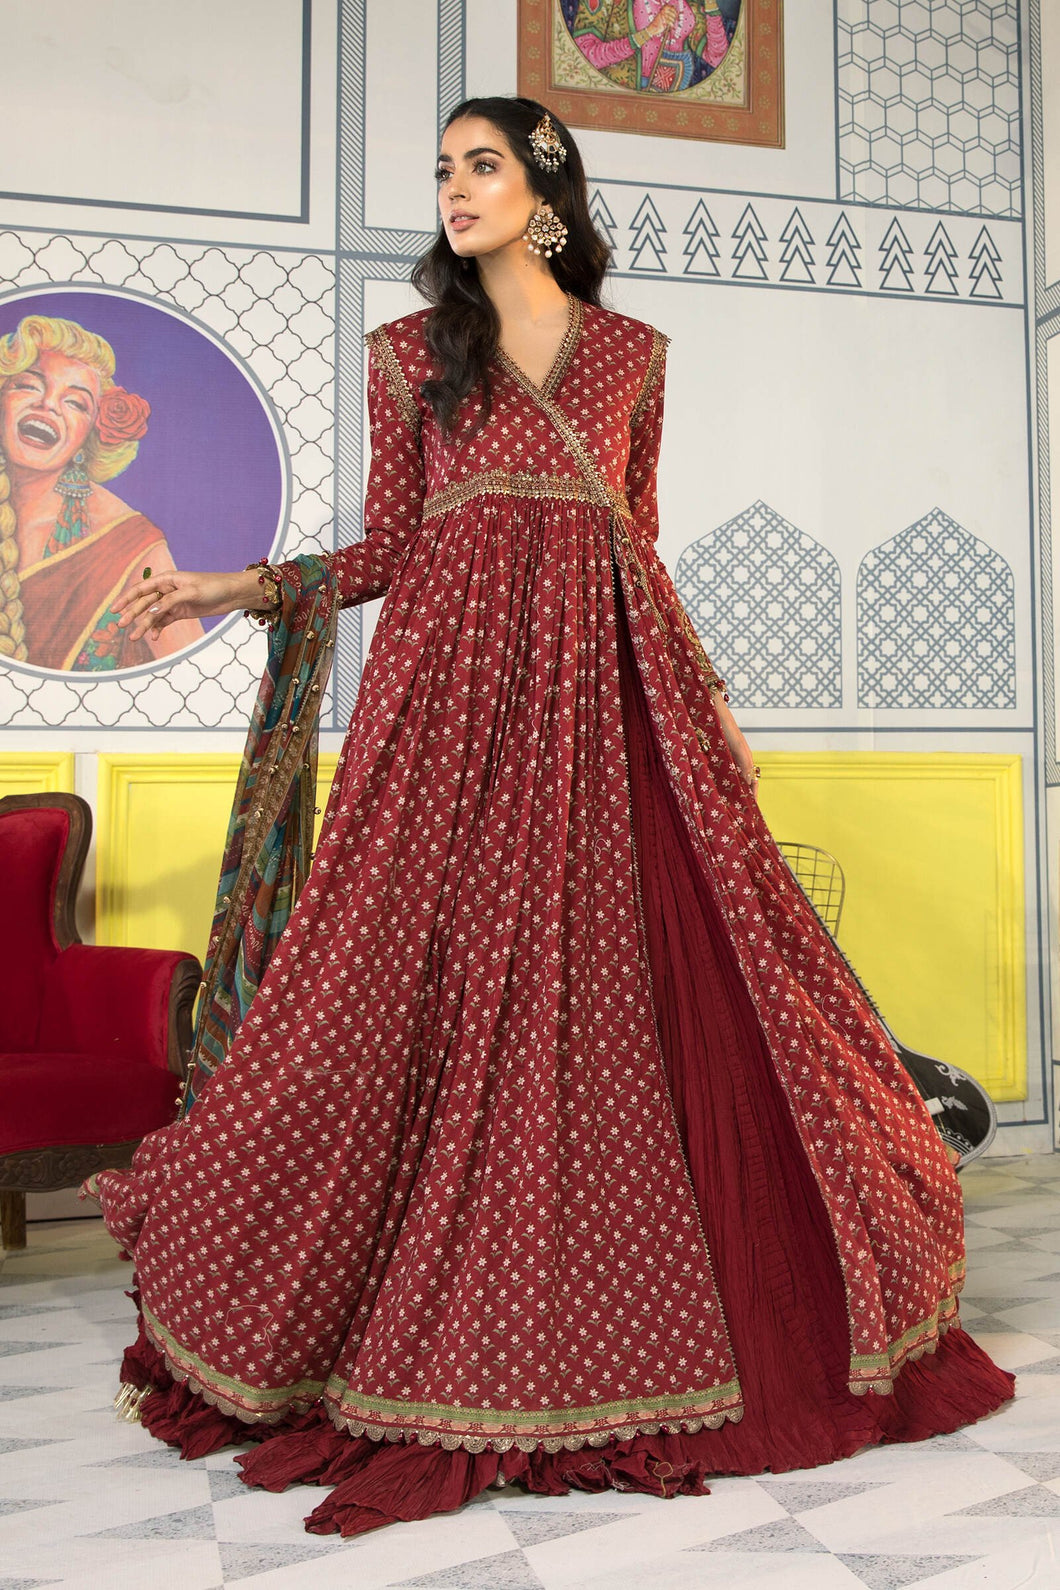 Mprints Maria B 2021 | MPT-1109-B Maroon 100% Original Guaranteed! Shop MariaB Mprints, Sana Safinaz, Asim Jofa from LebaasOnline.co.uk on SALE Price in the UK, USA, Belgium, Australia & London. Explore the latest pakistani party wear collection of MariaB Mprint official at Lebaasonline today - With DISCOUNT CODE 